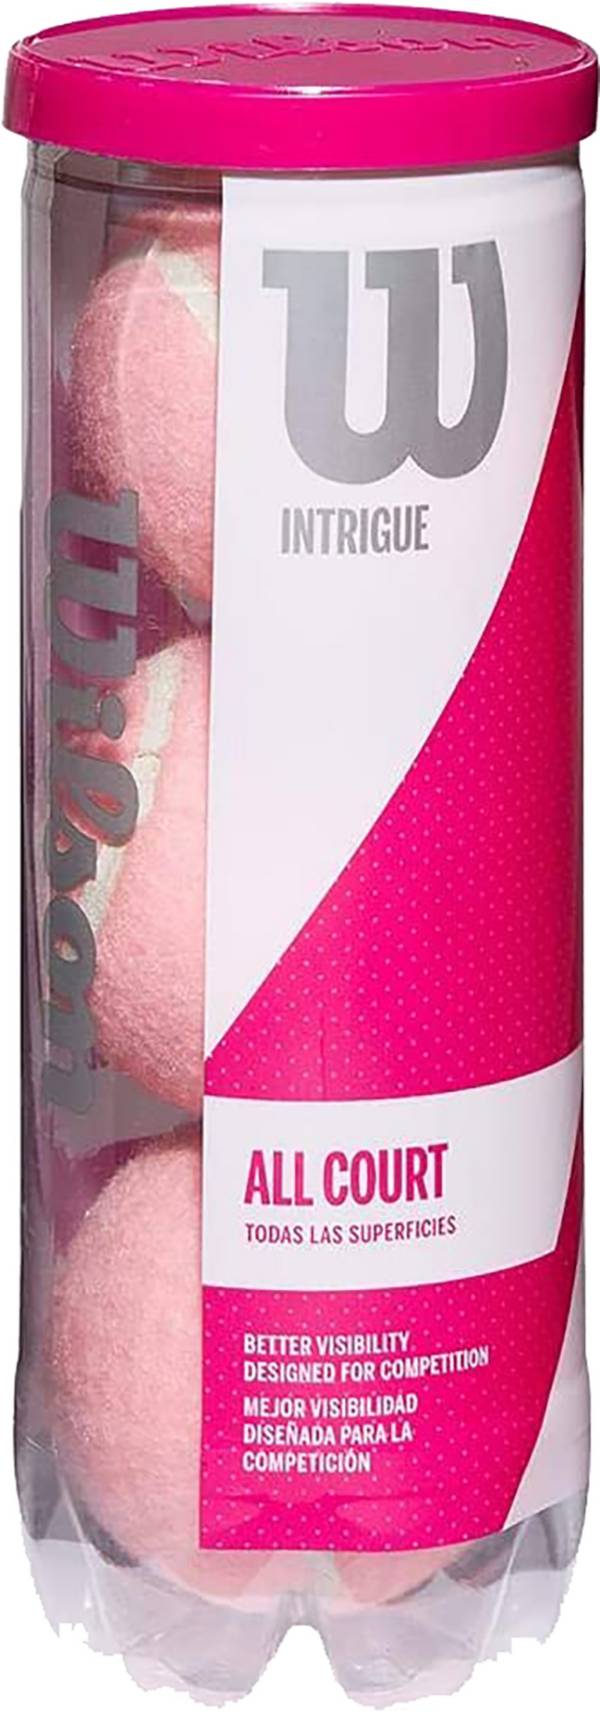 Wilson Intrigue Pink All-Court Tennis Balls product image